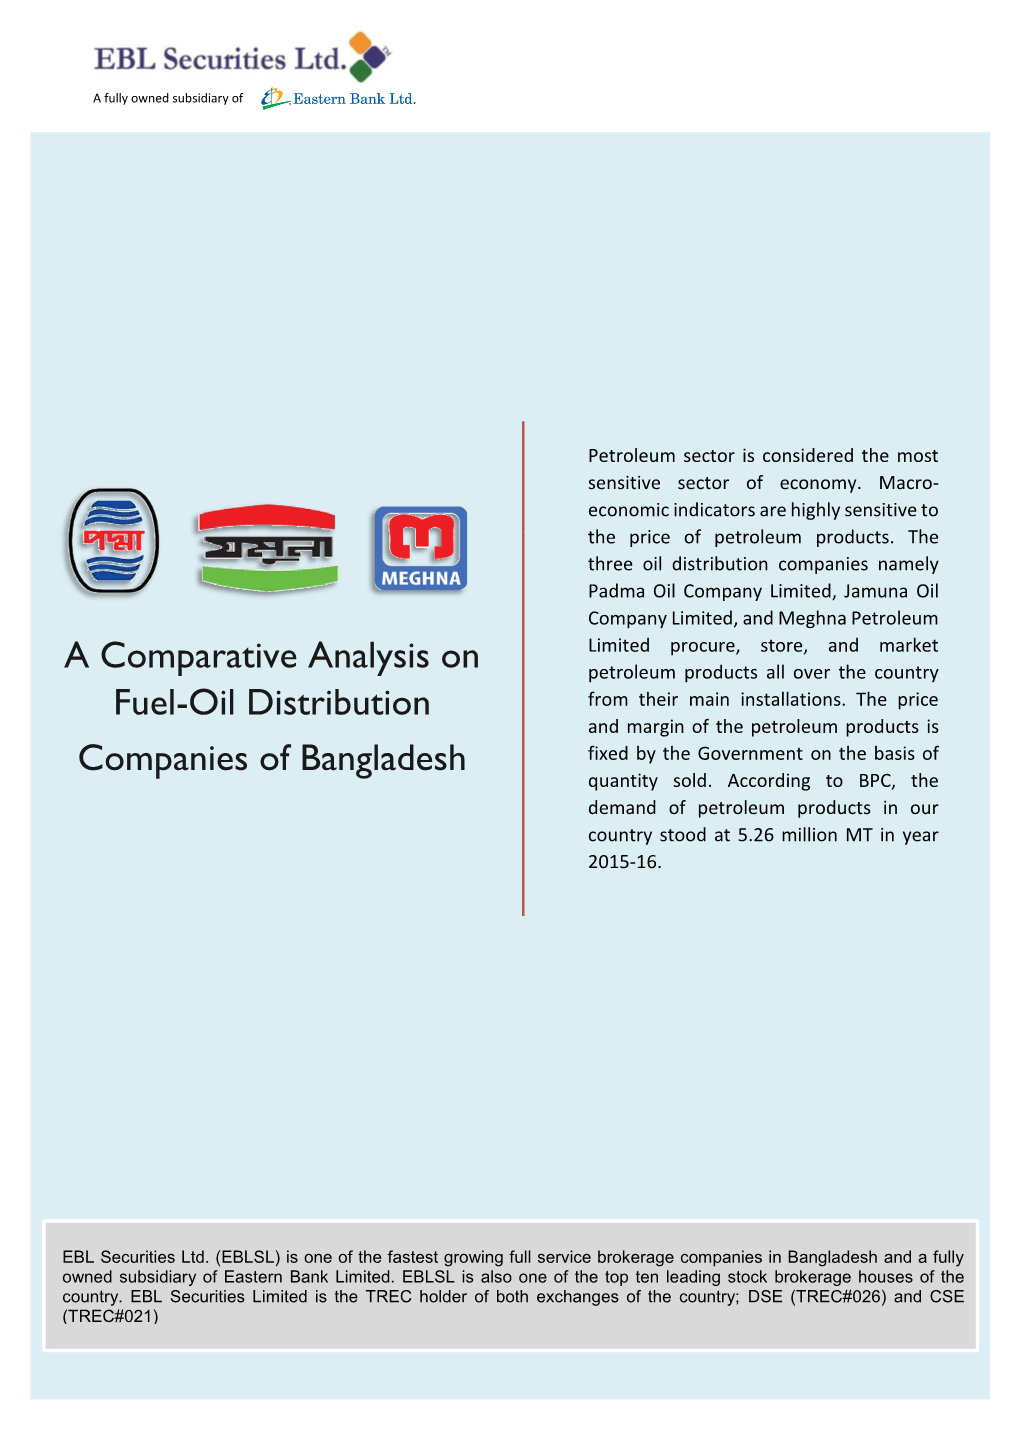 A Comparative Analysis on Fuel-Oil Distribution Companies of Bangladesh Date: October 5, 2017